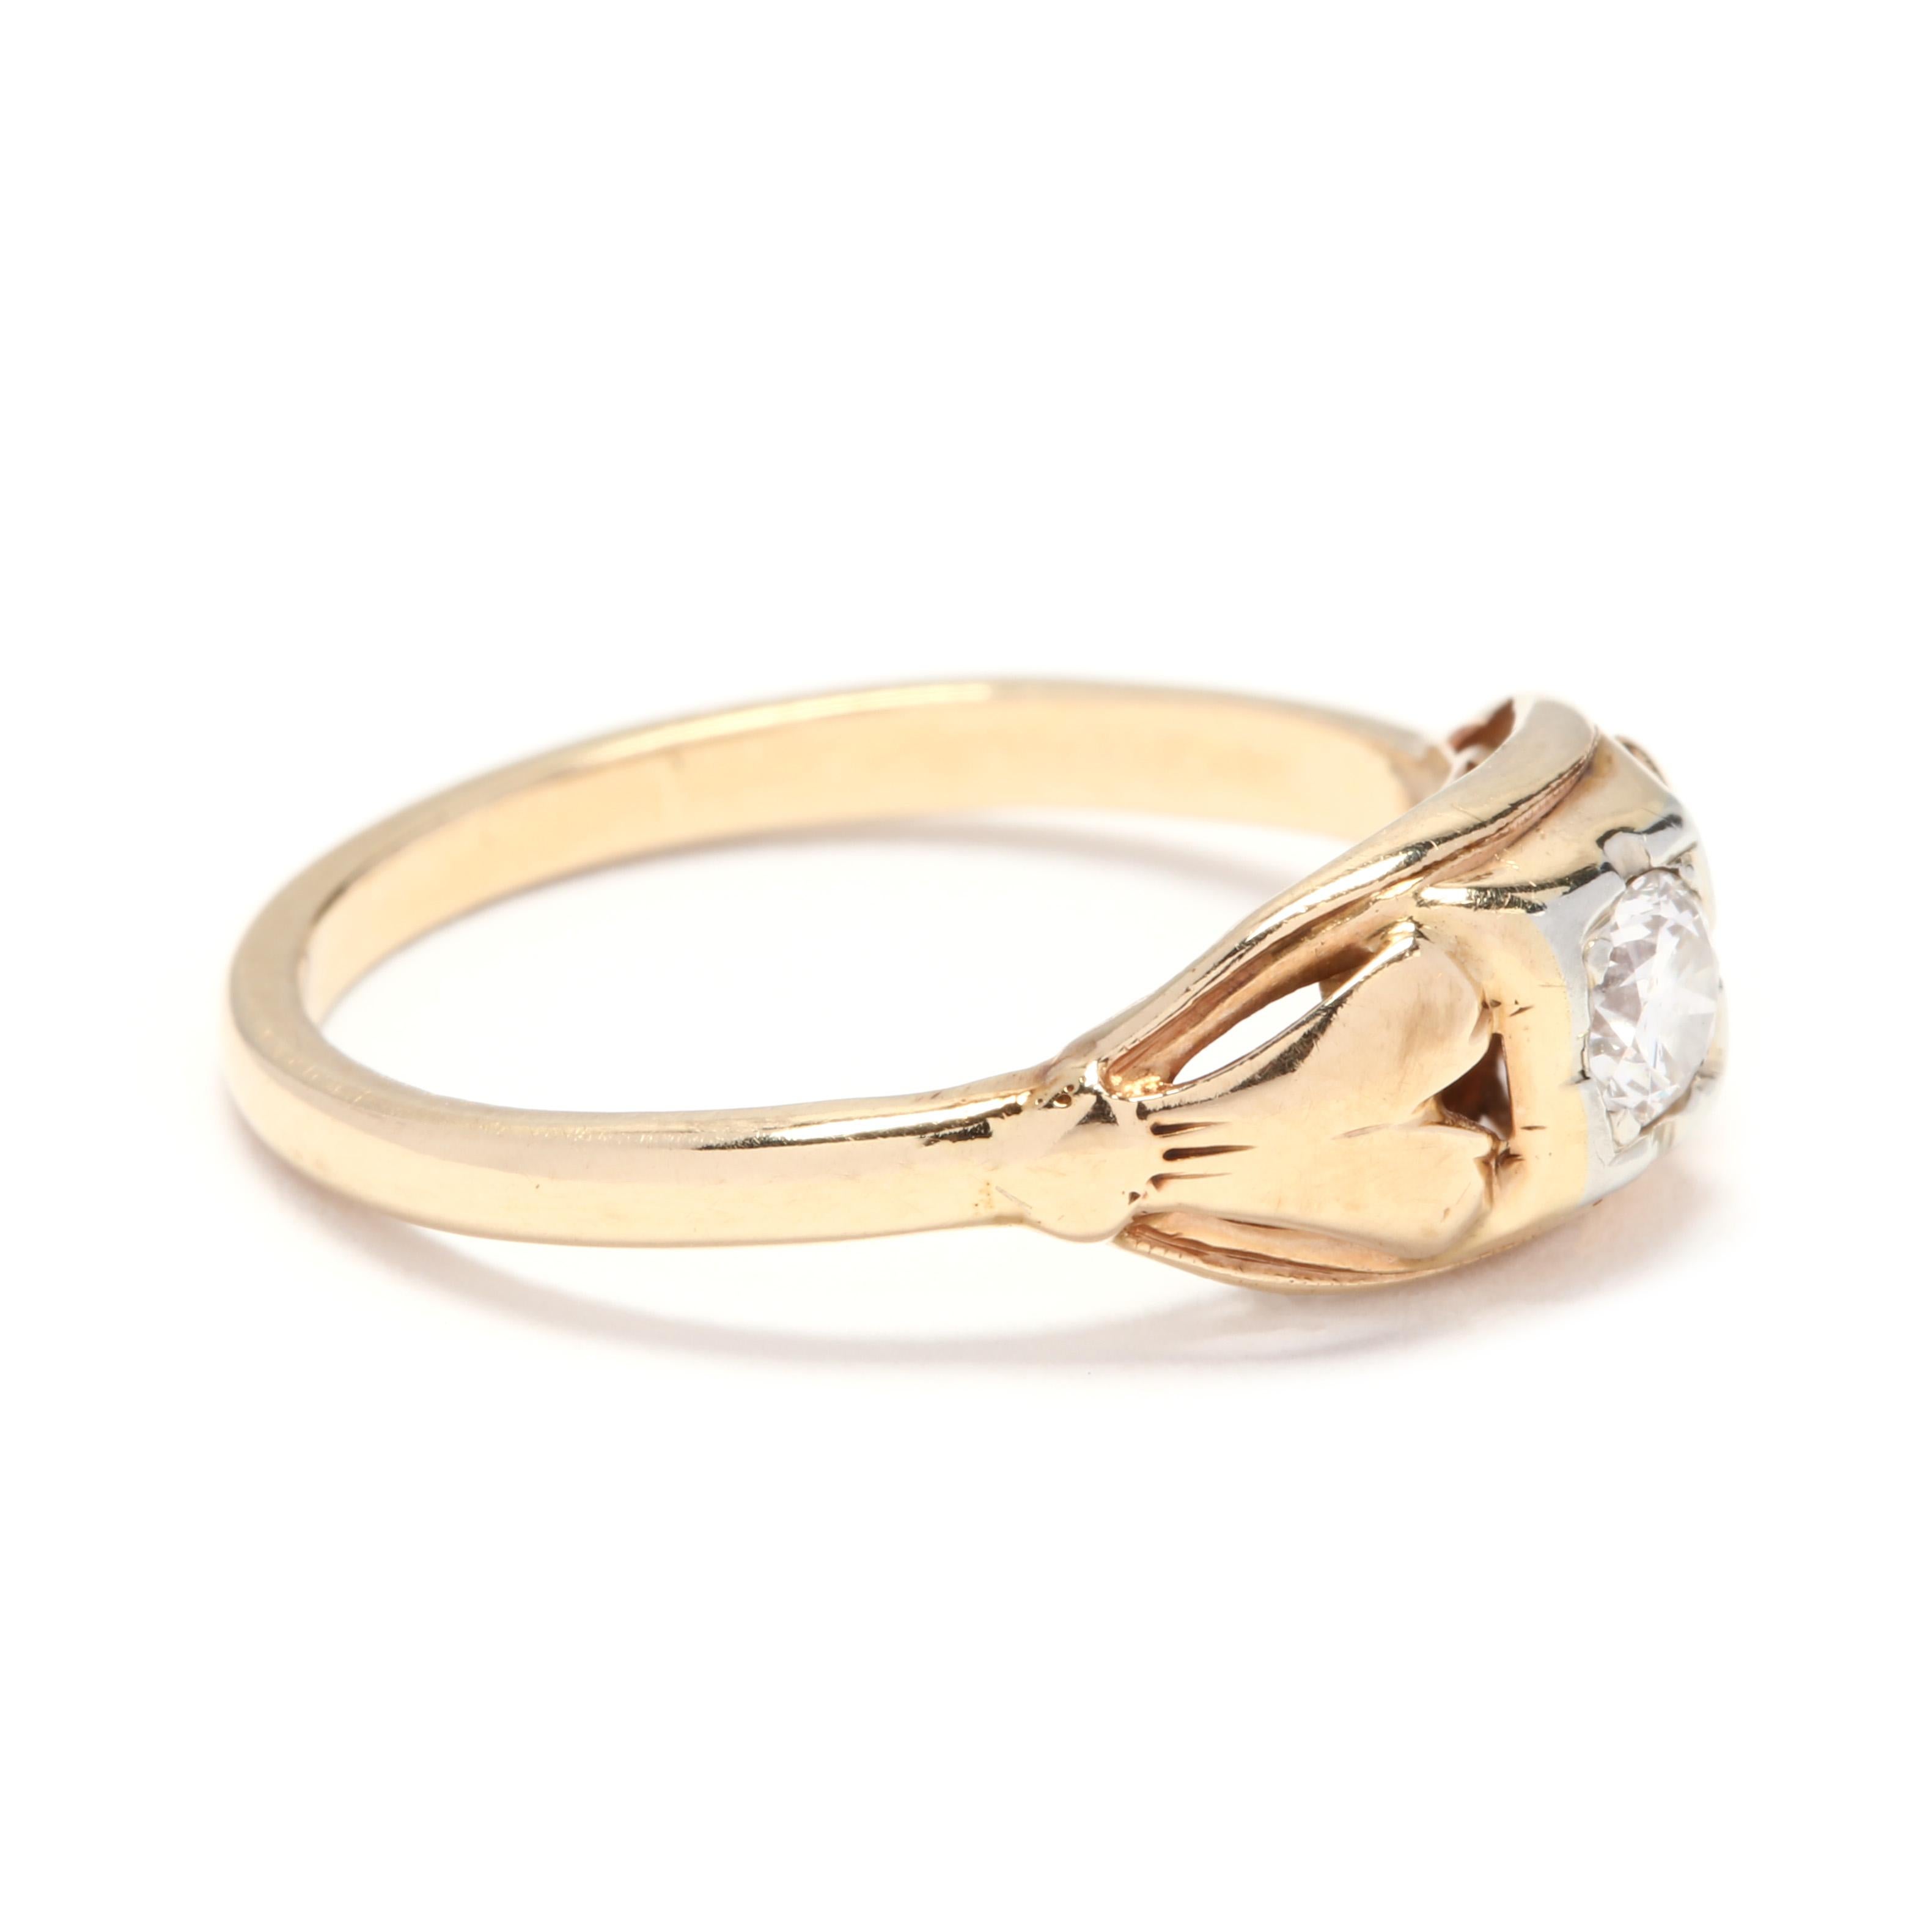 A mid-century 14 karat yellow gold and diamond engagement ring. This ring features a transitional cut diamond weighing approximately .21 carat set in a lozenge shape mounting with  cut out detailing and a polished shank.

Stones:
- diamond, 1